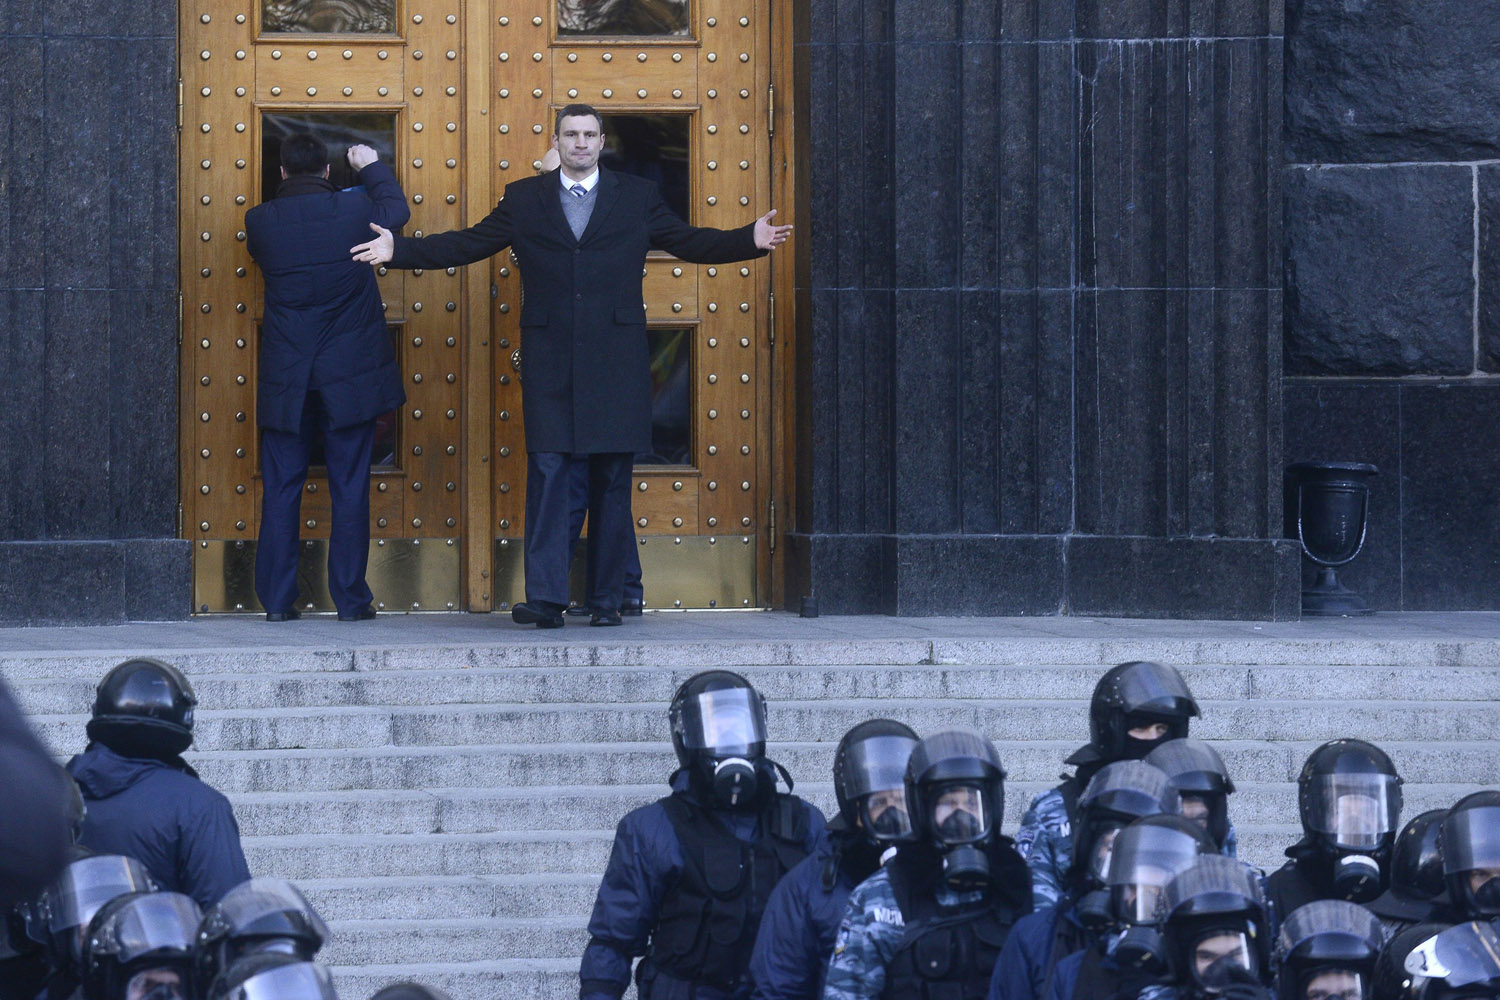 Nov. 27, 2013. Oleh Tyahnybok, left, leader of the of nationalist Svoboda (Freedom) party tries to open the door to Cabinet of Ministers as lawmaker and chairman of the Ukrainian opposition party Udar (Punch), WBC heavyweight boxing champion Vitali Klitschko, right, raises his arm to indicate that the door is closed  during a rally in front of the Ukrainian Cabinet of Ministers in Kiev, Ukraine.